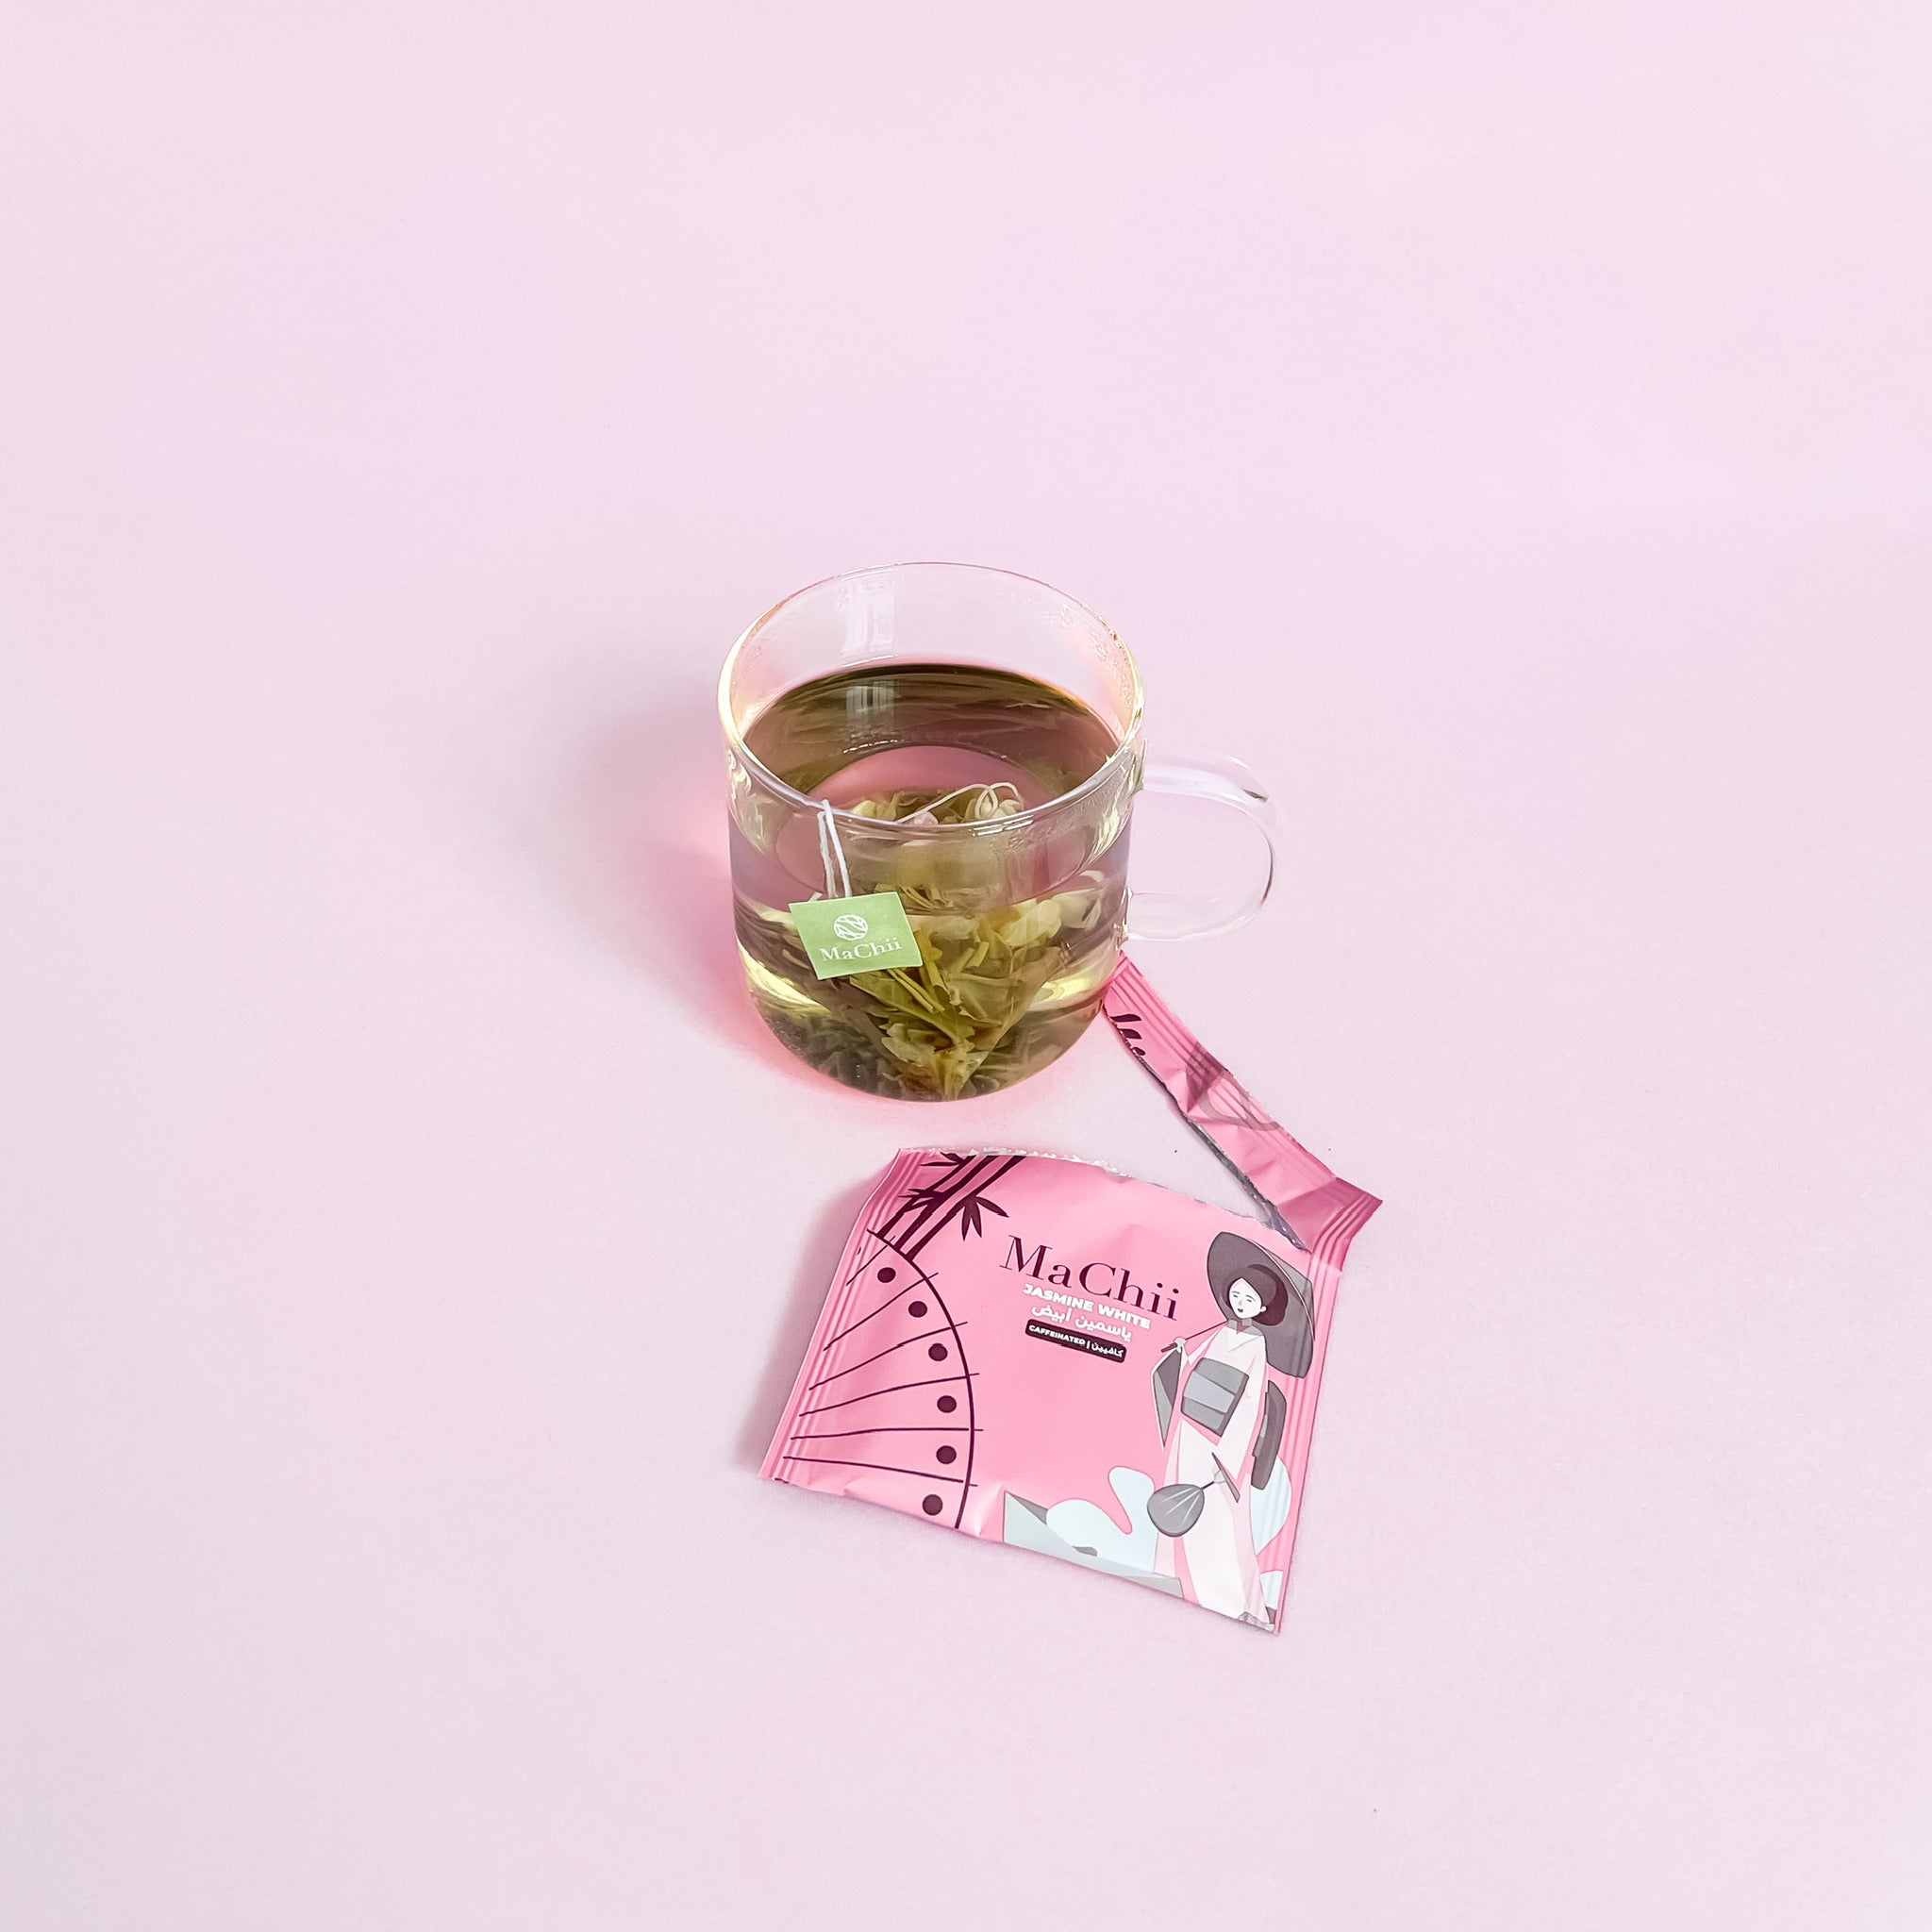 wholesale tea jasmine white tea bag in tea cup brewing. envelope open to the side